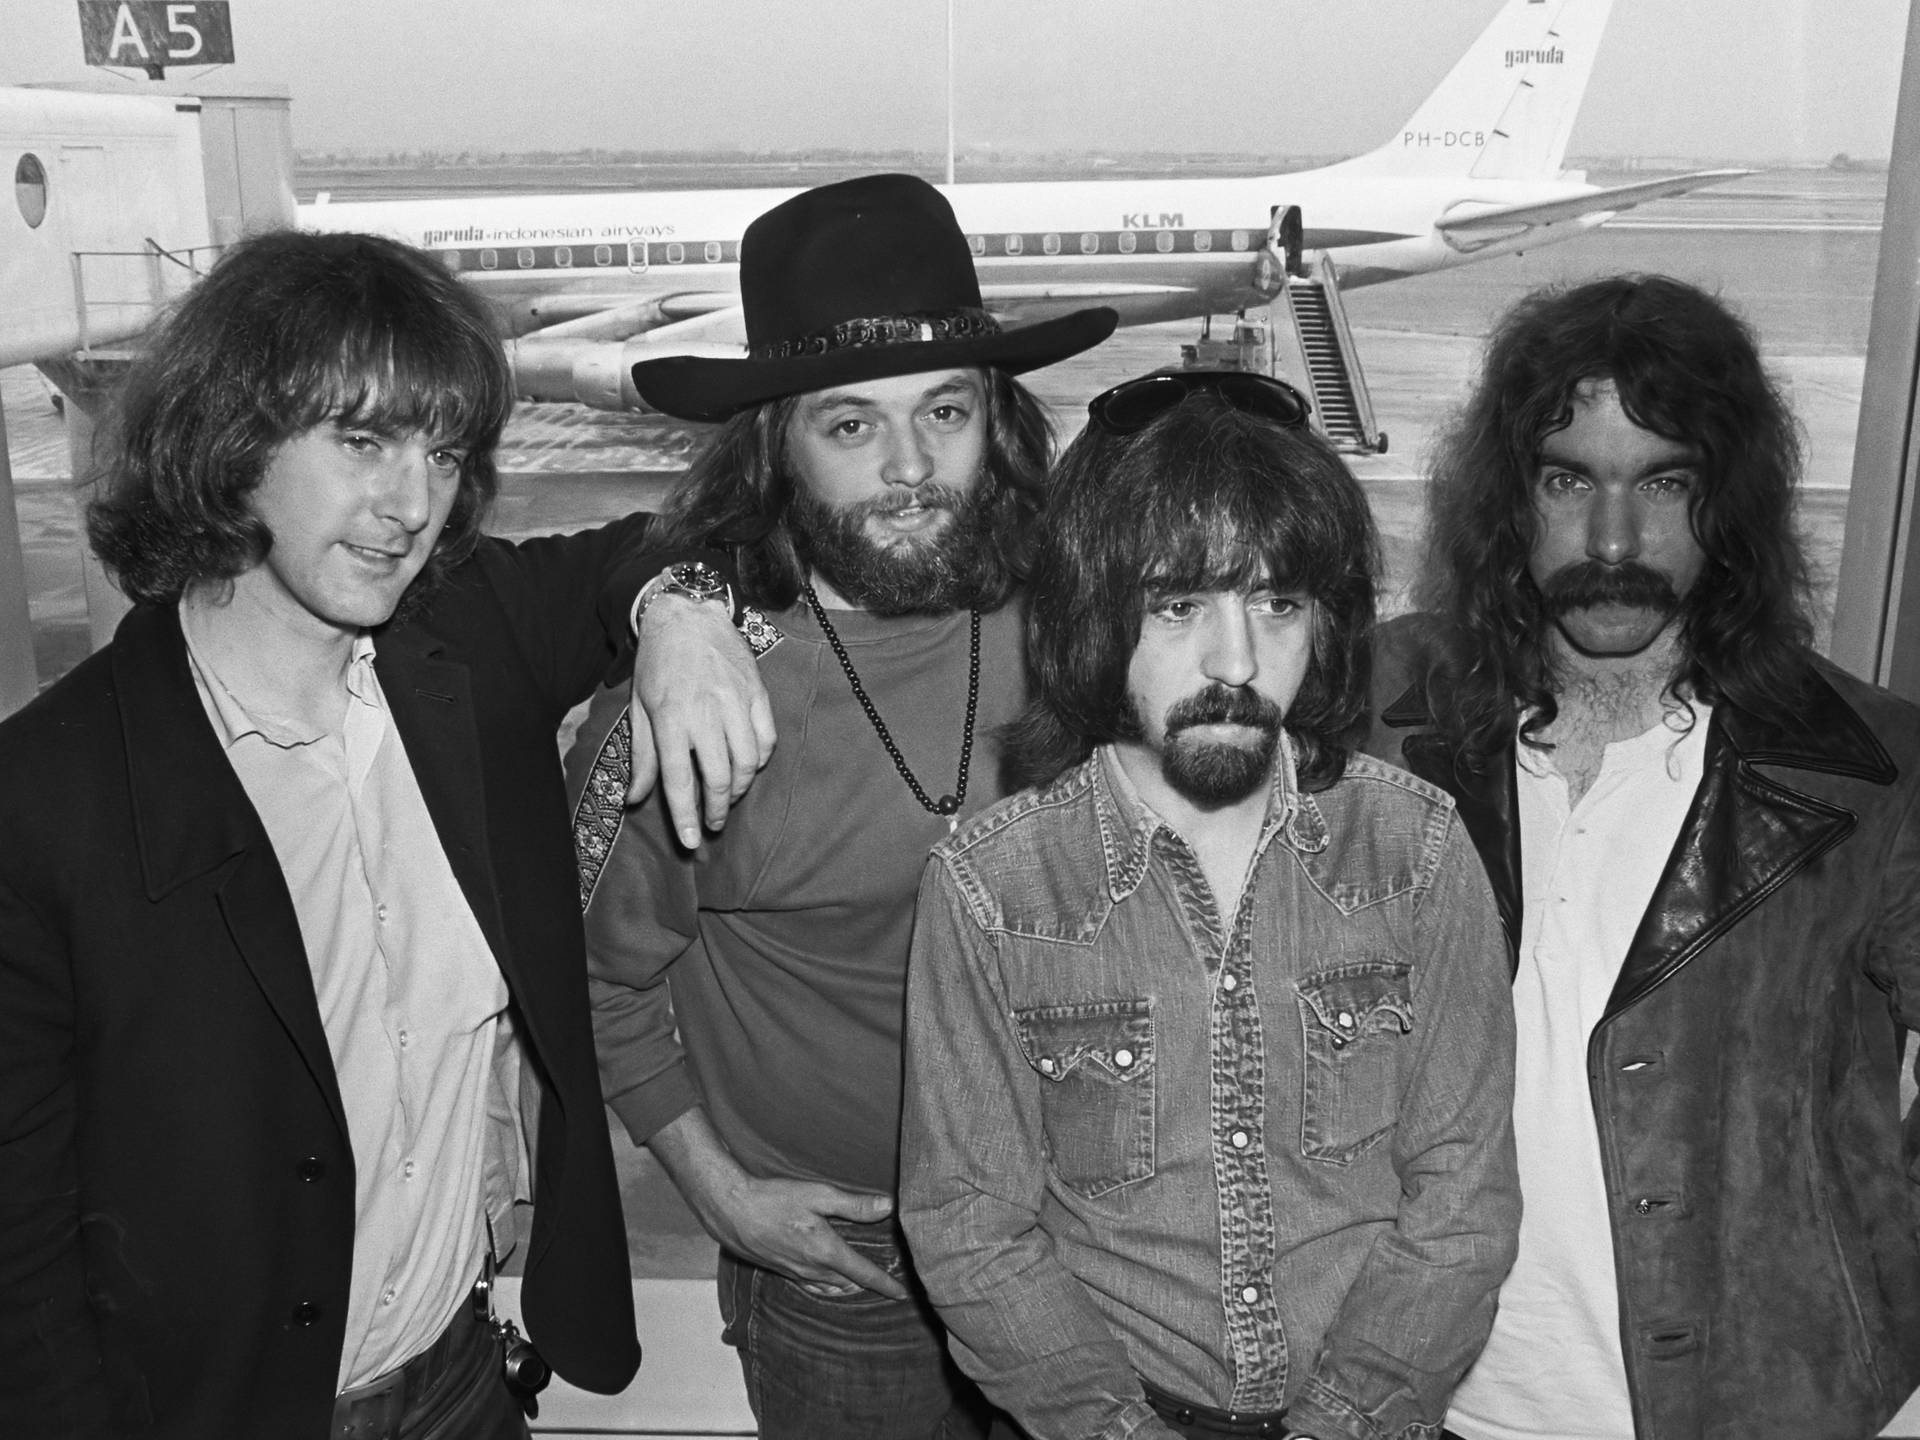 Members of the iconic rock band, The Byrds, featuring Skip Battin. Wallpaper